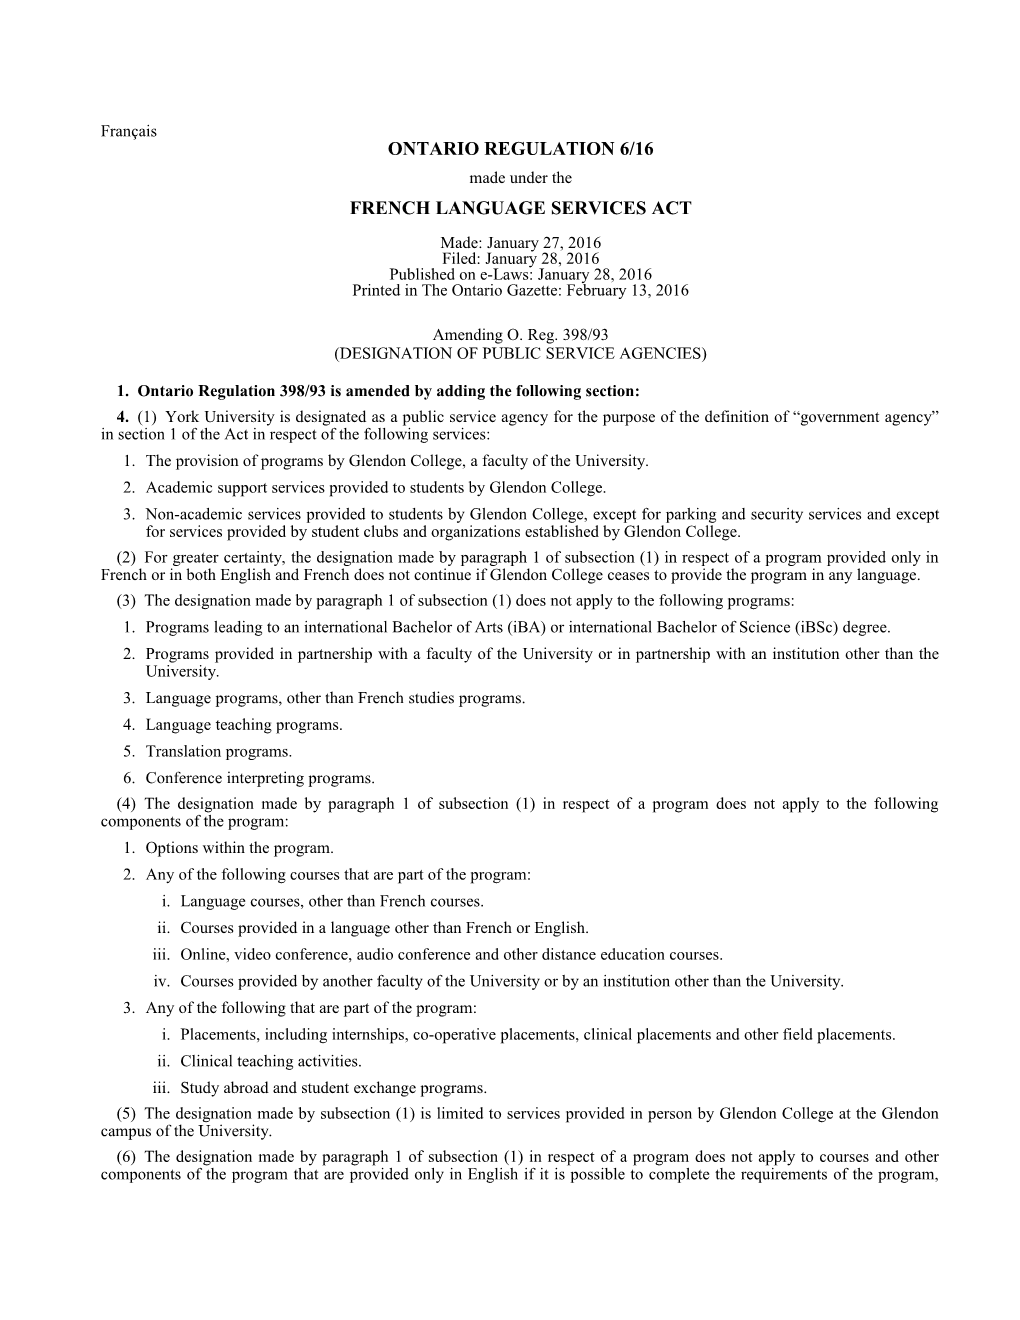 FRENCH LANGUAGE SERVICES ACT - O. Reg. 6/16